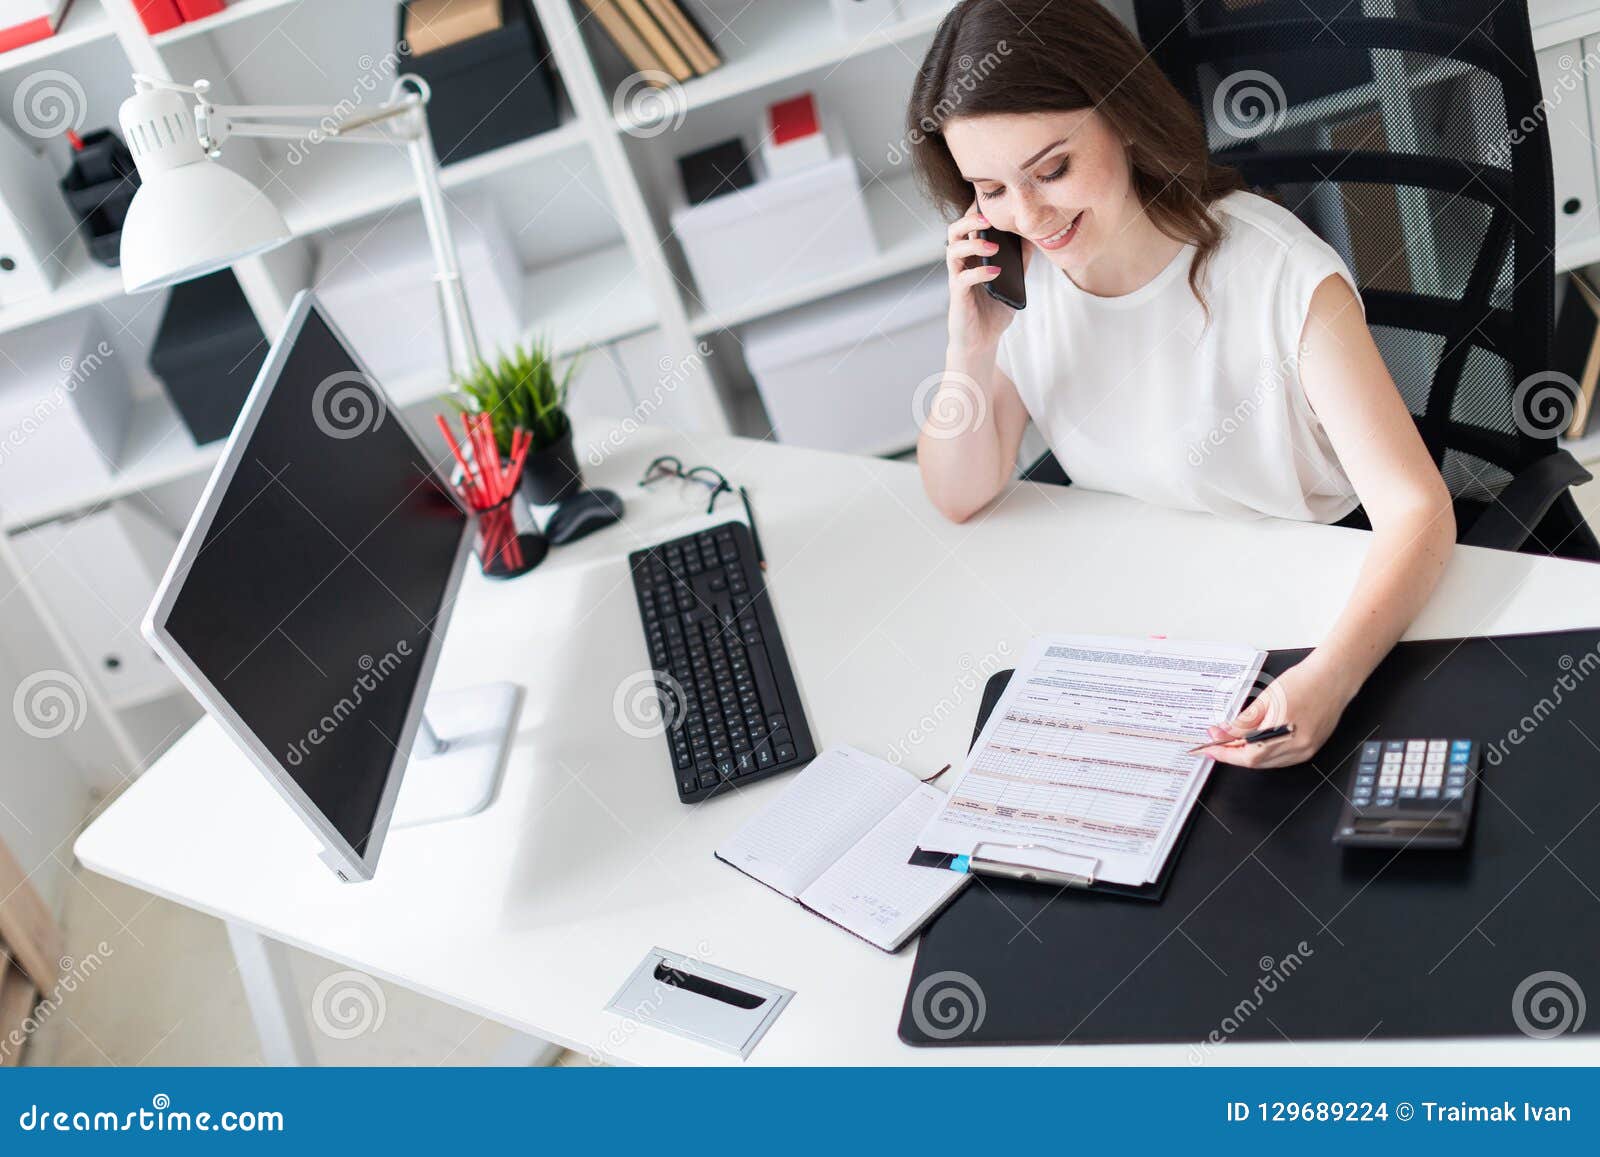 A Young Girl Sitting In The Office At The Computer Desk Talking